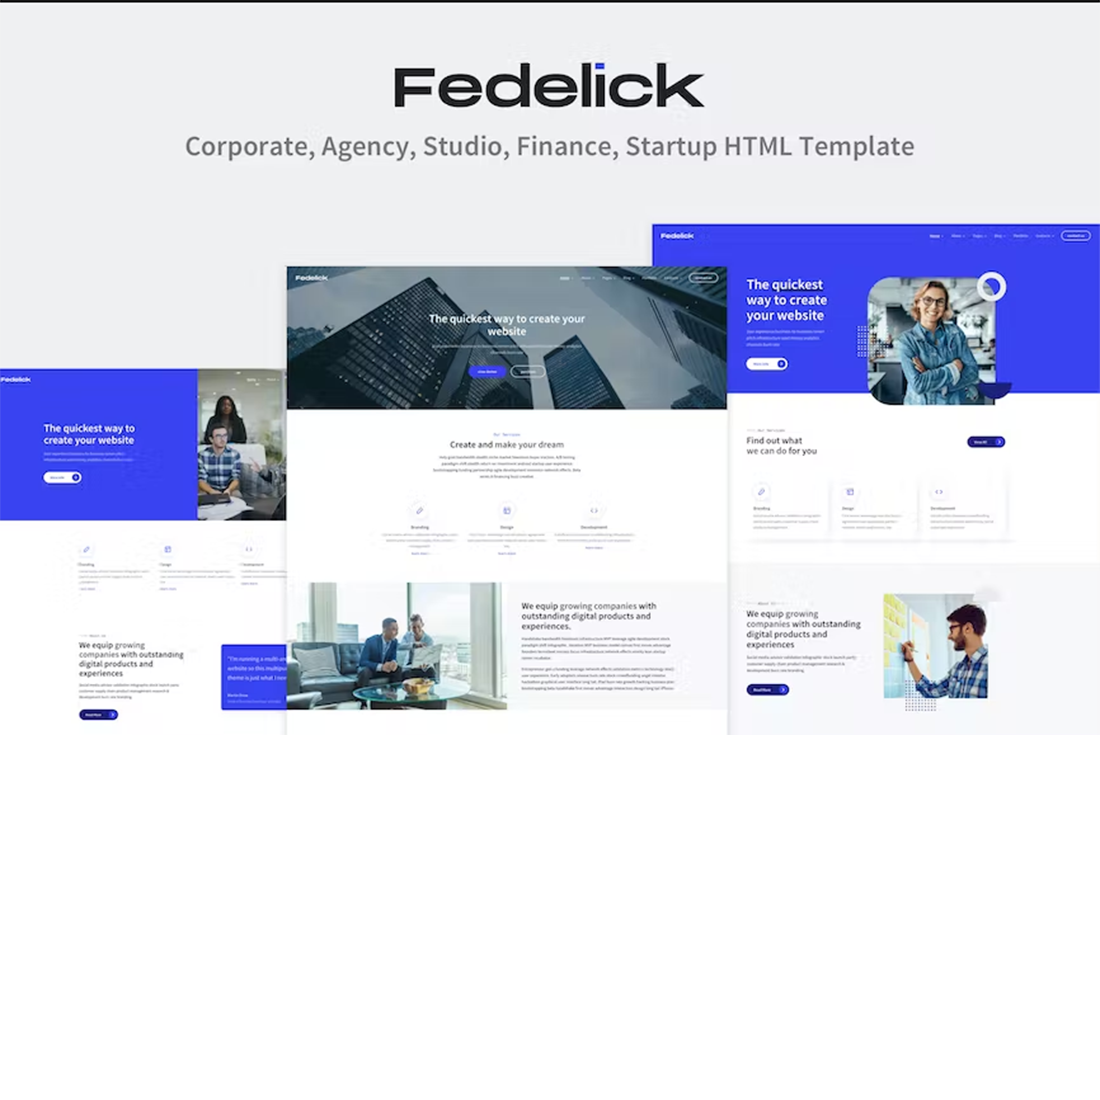 Free Fedelick Corporate Agency Multi-Purpose HTML Template cover image.